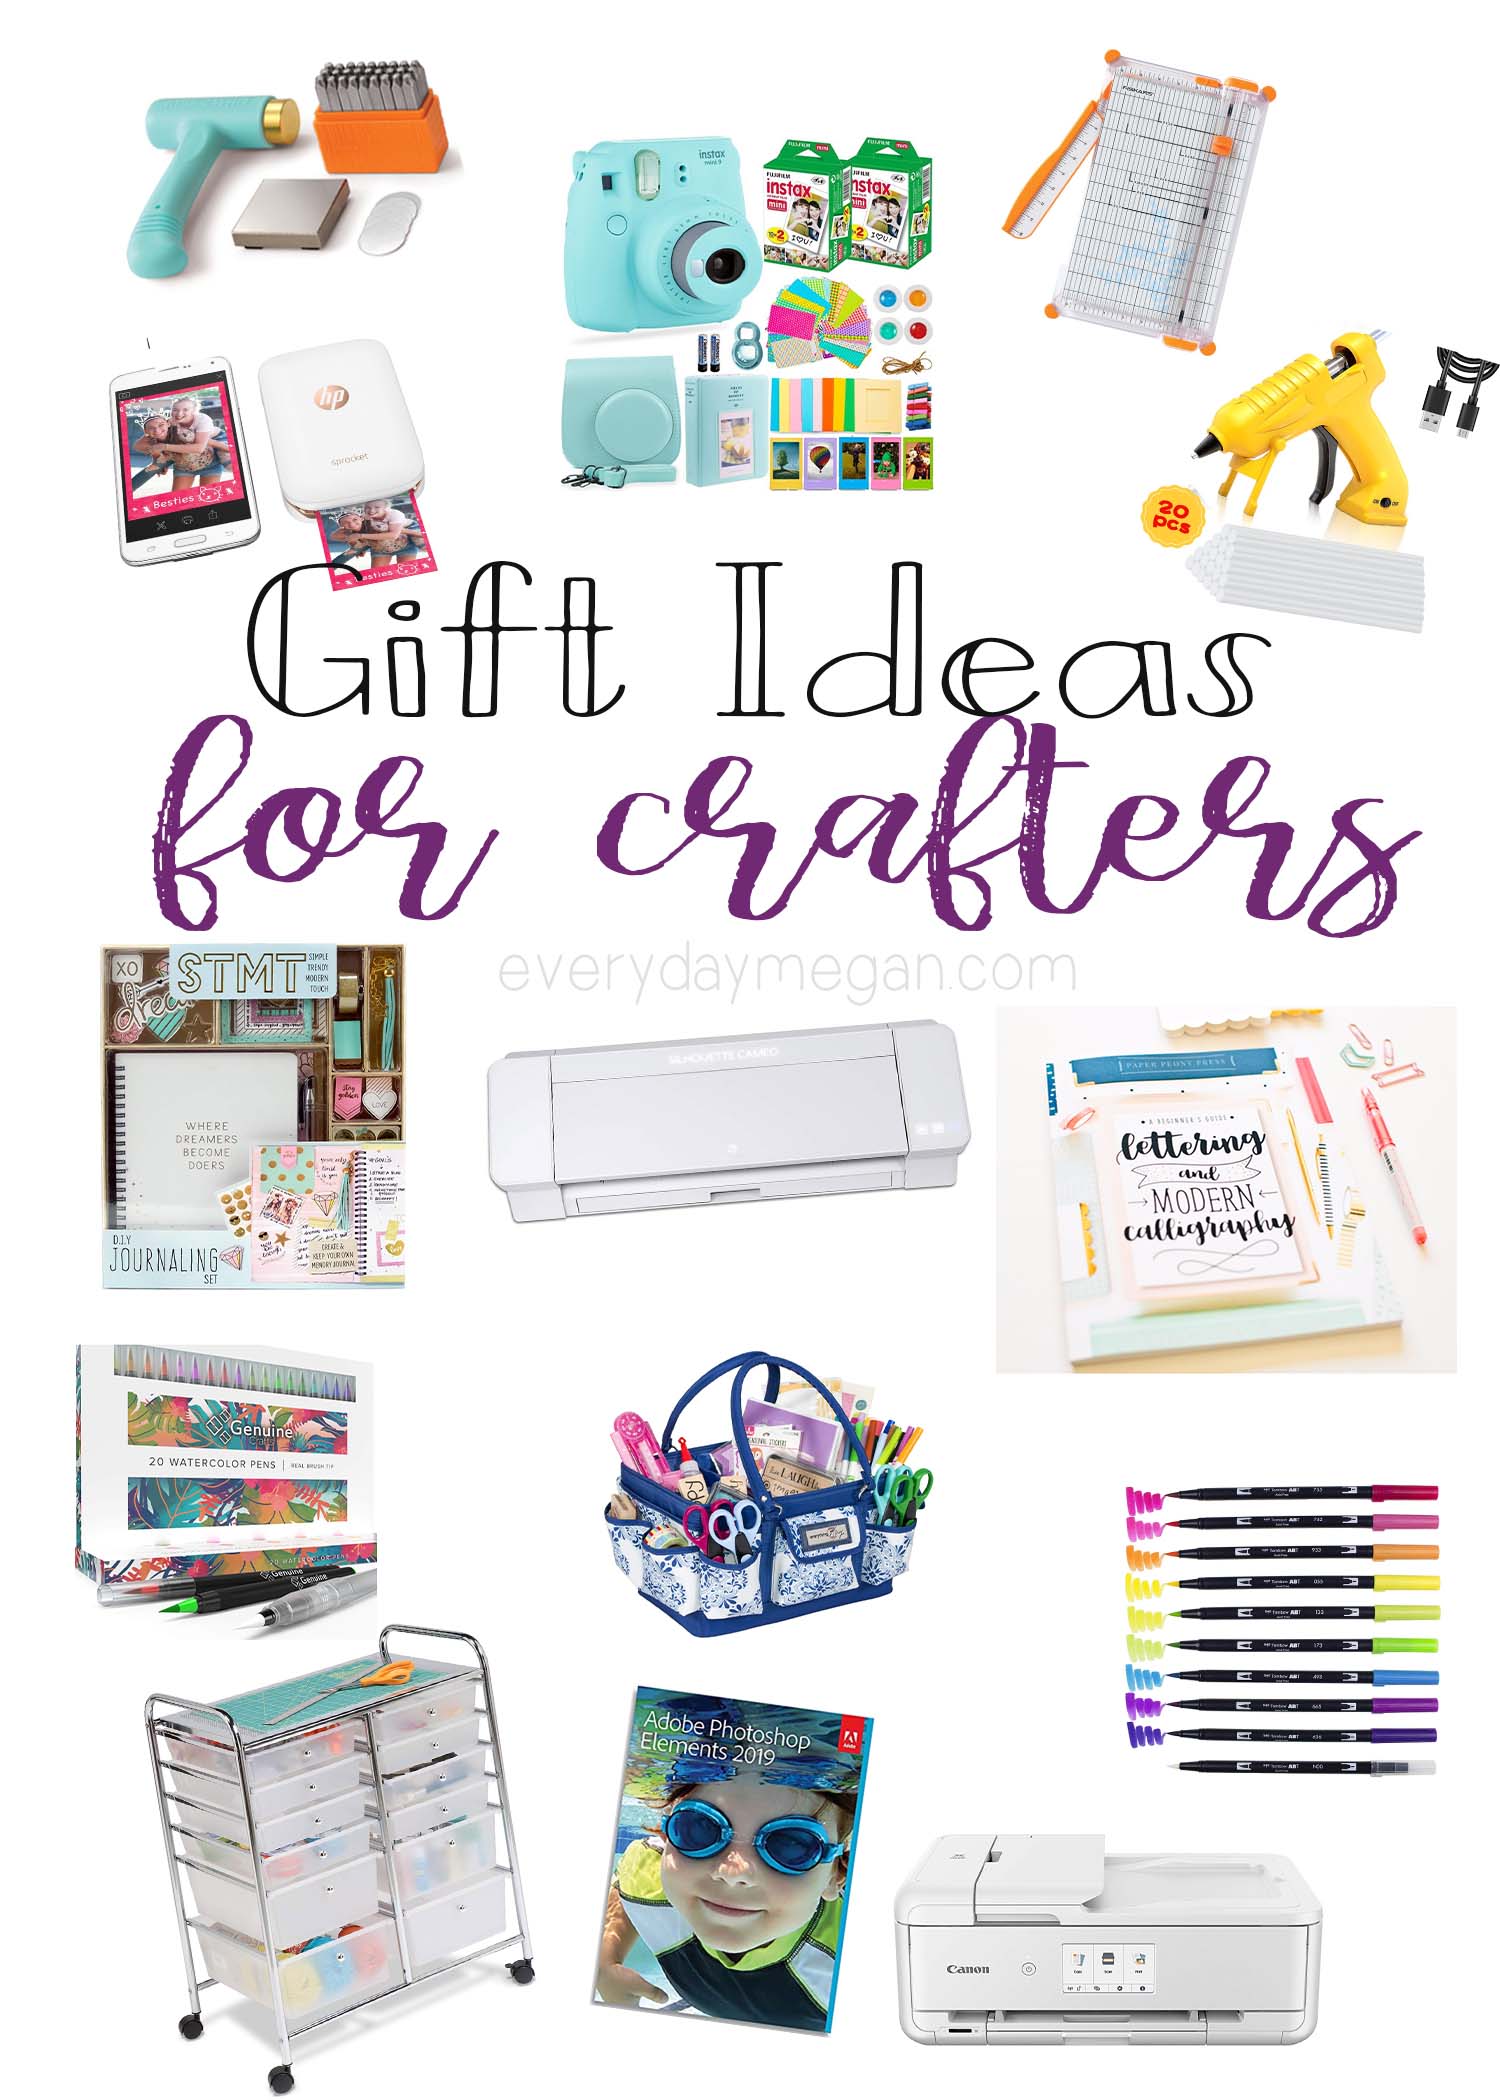 The ultimate gift guide for creatives - Presents for artist and crafters 